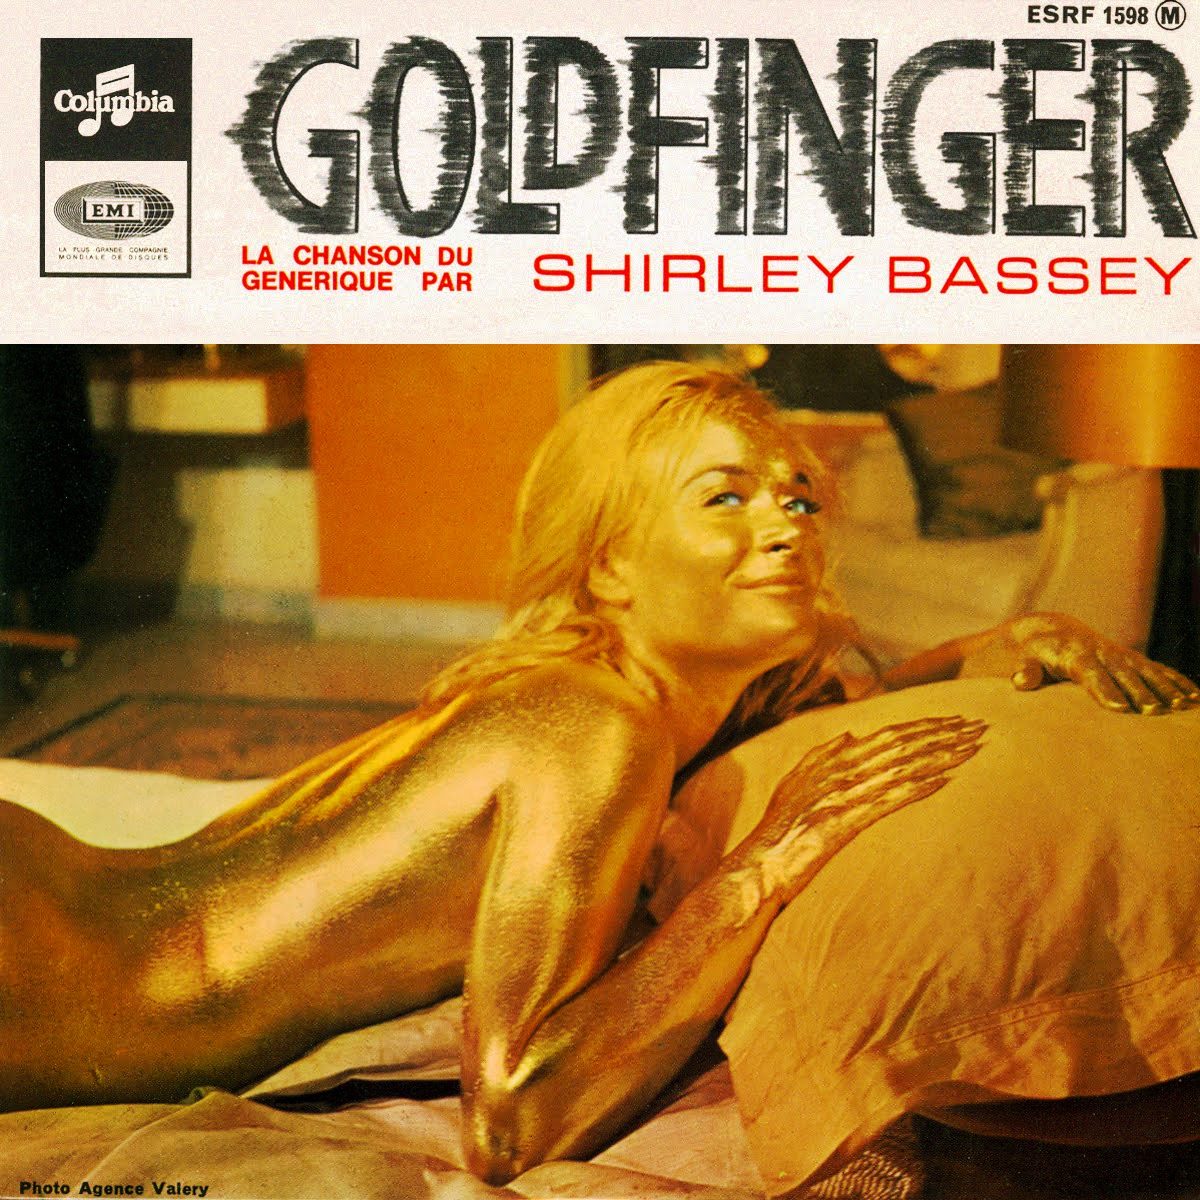 He's the man, the man with the midas touch. Goldfinger